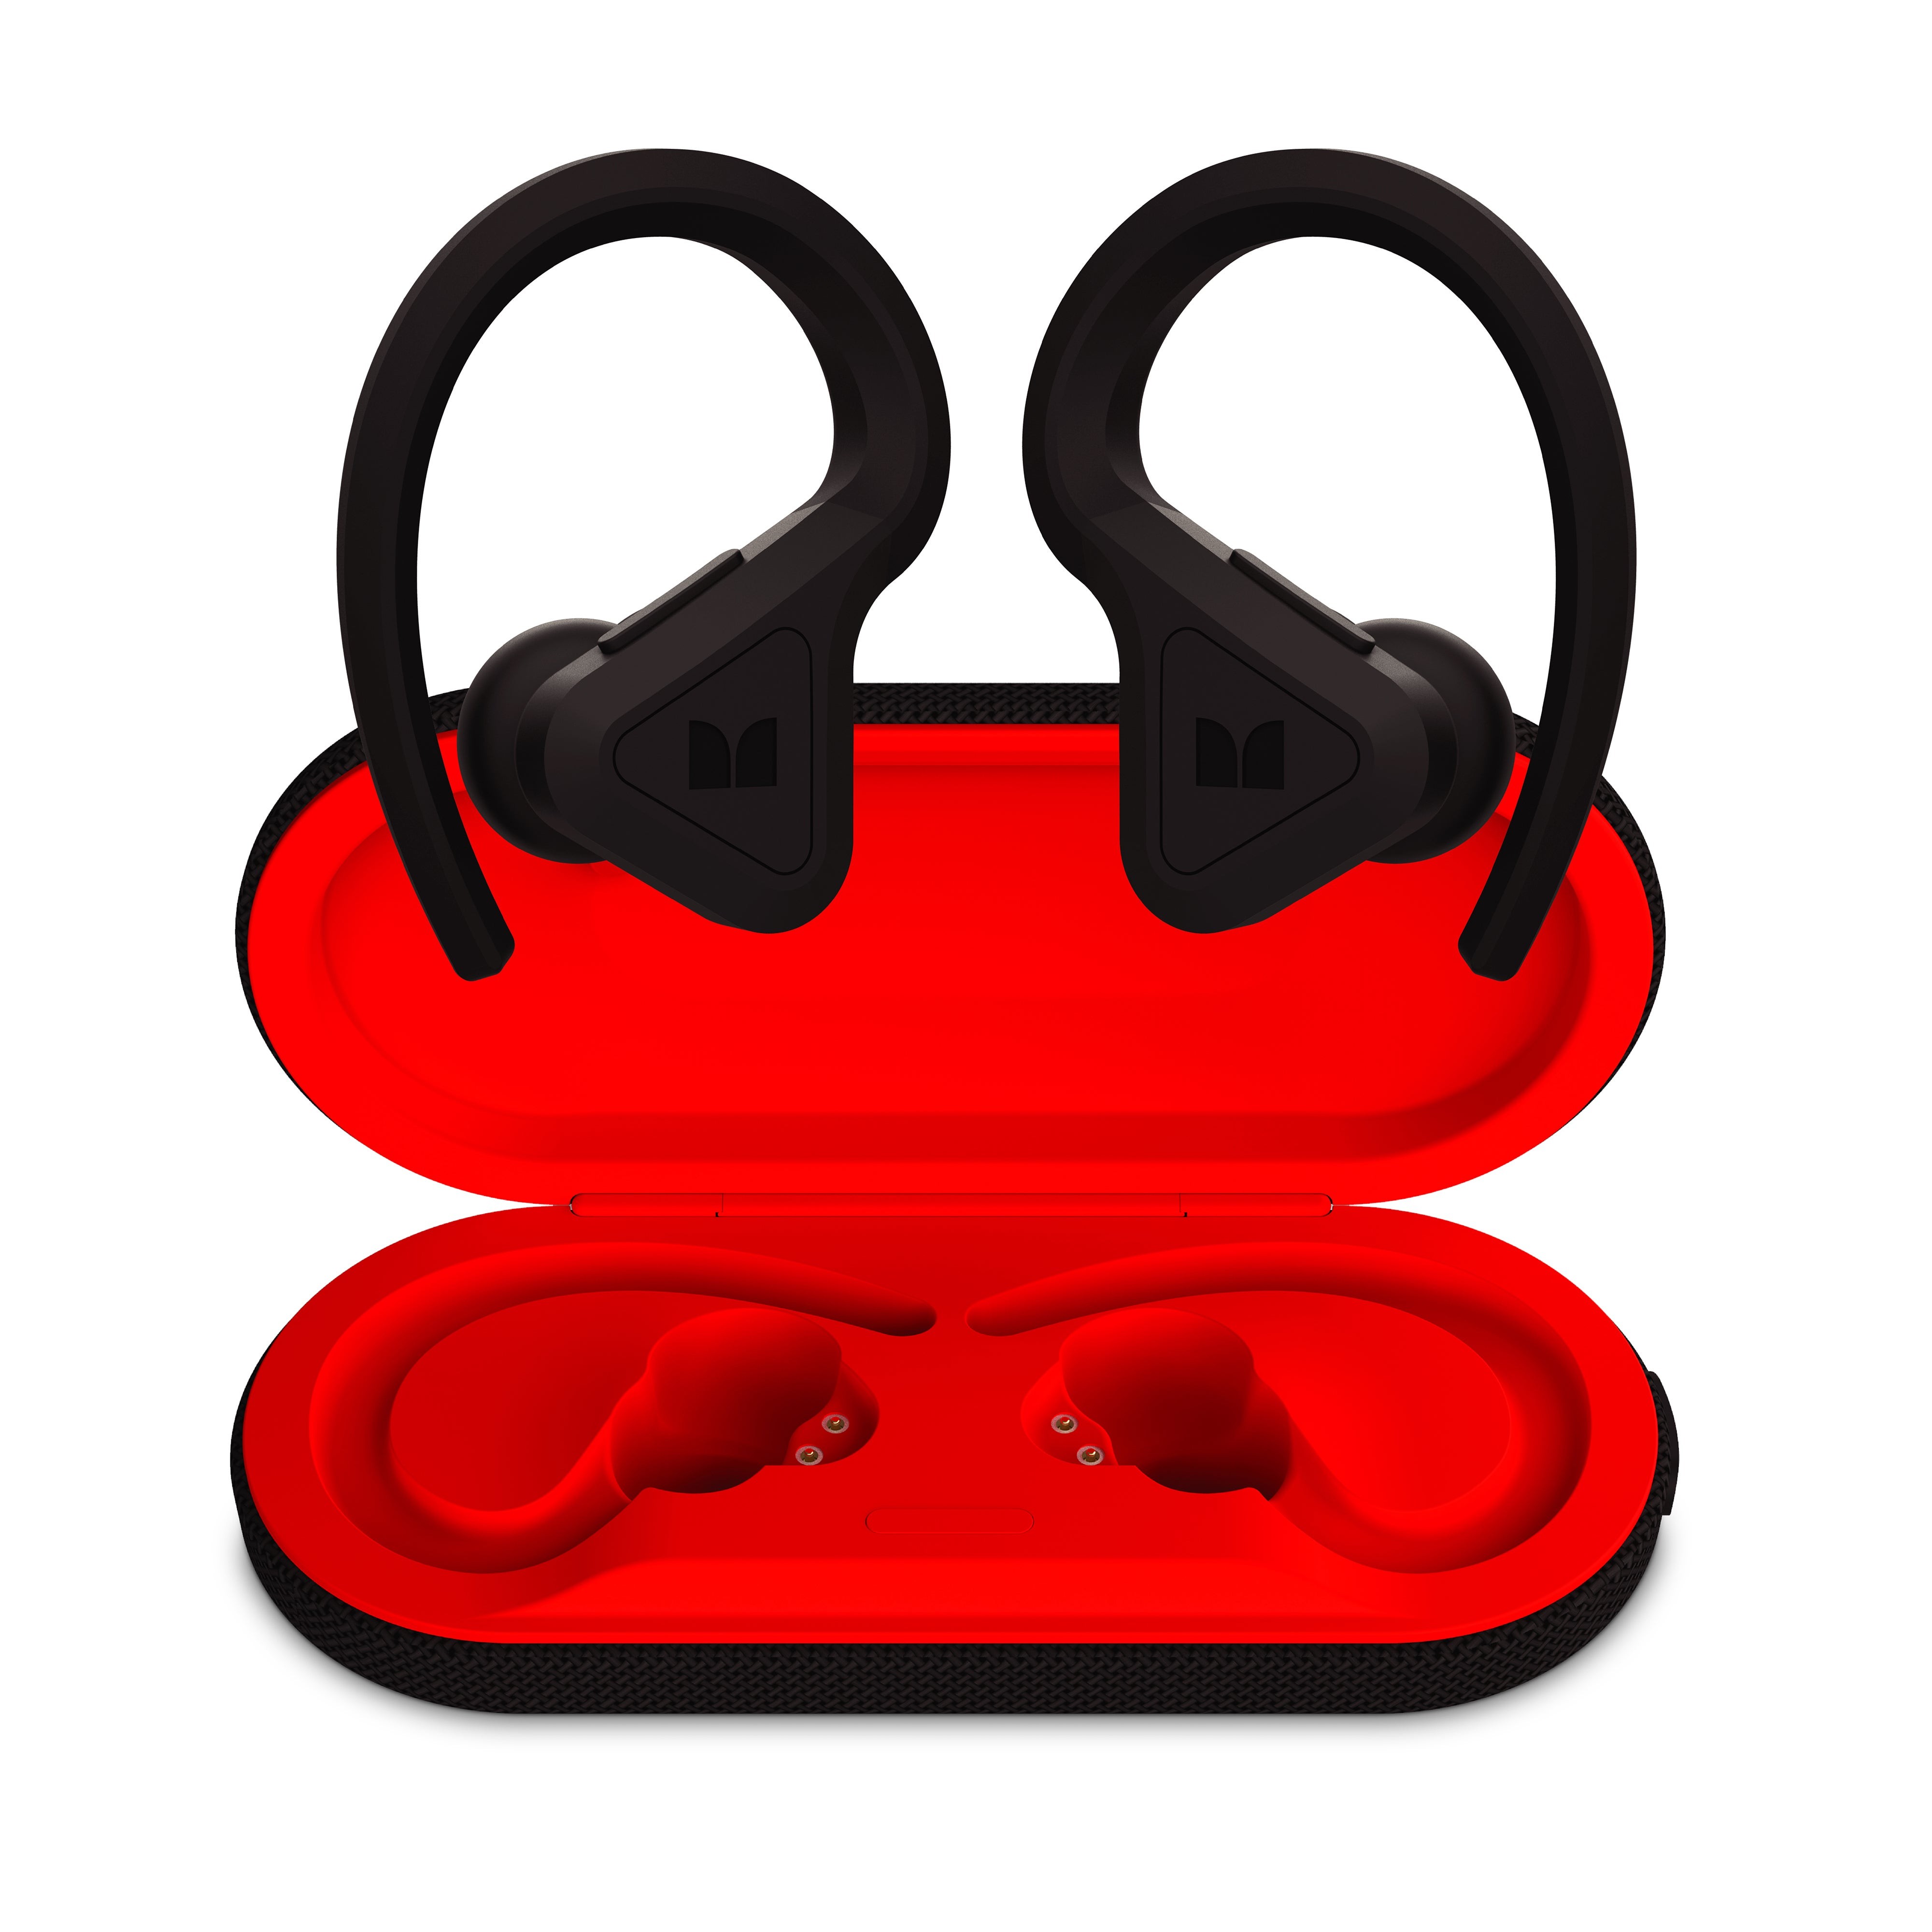 DNA Fit Sport ANC True Wireless Earbuds Black & Red